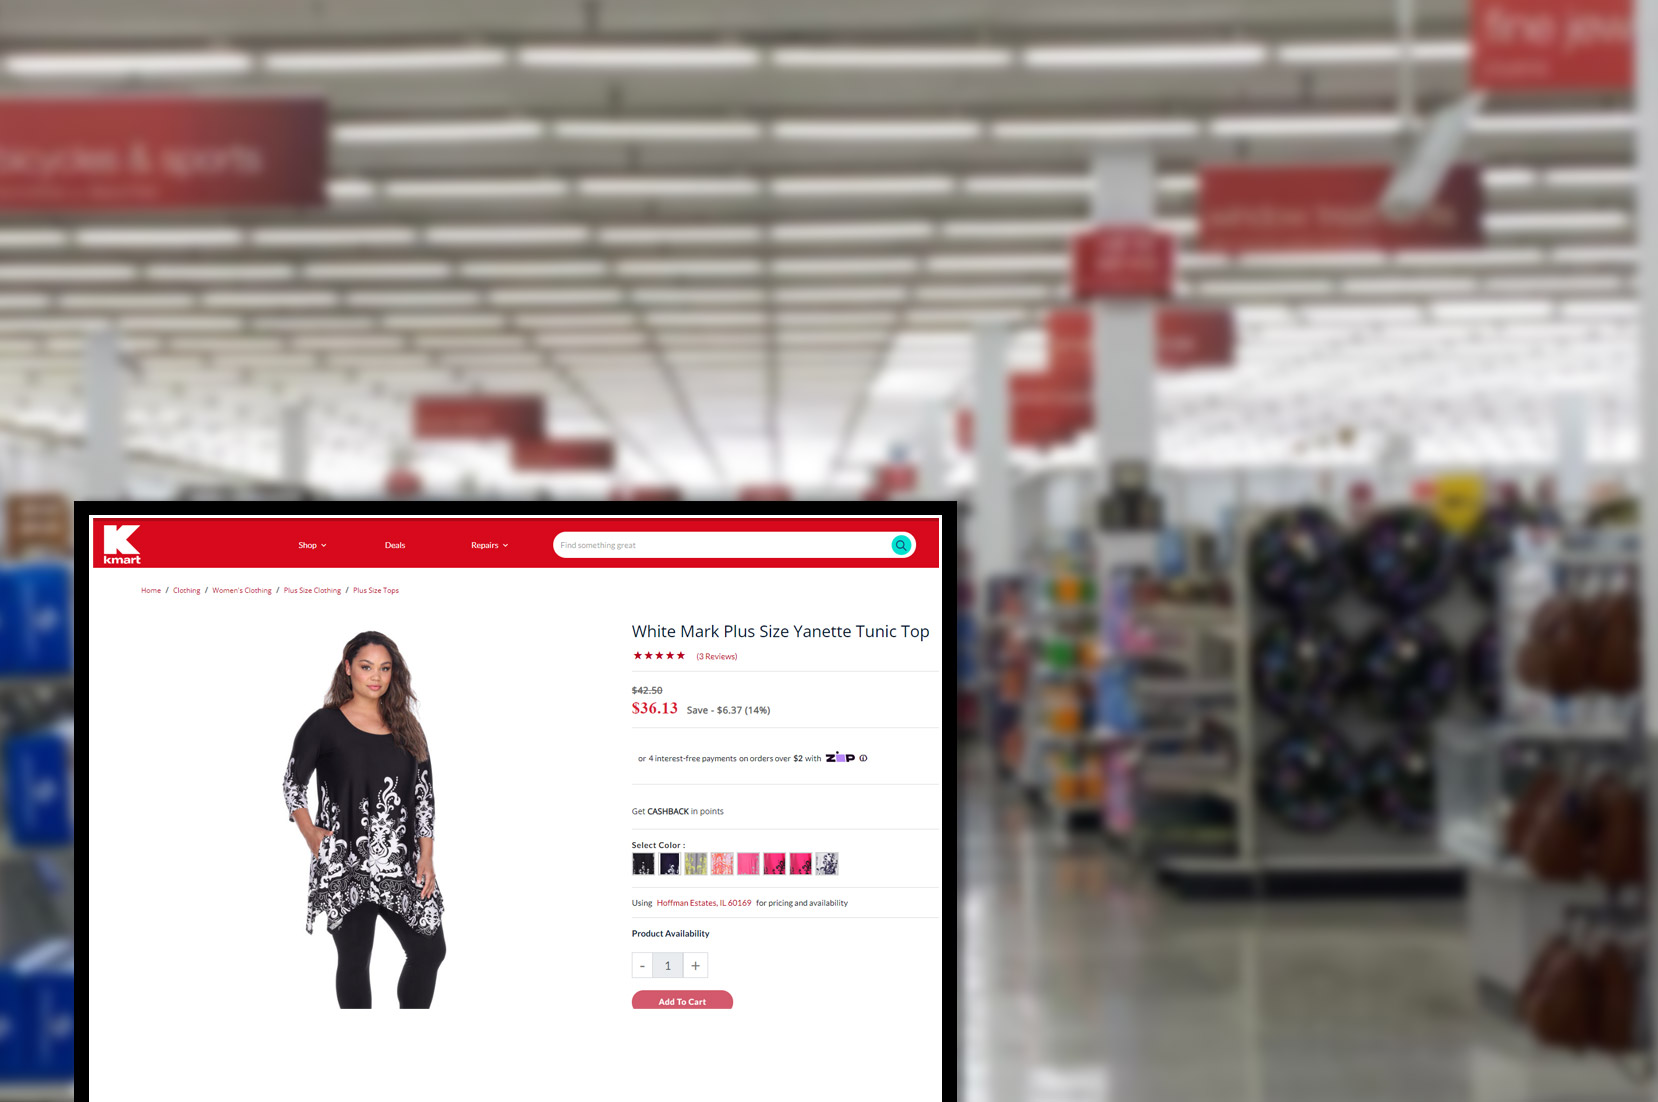 kmart-comproduct-pricing-information-and-image-scraping-services